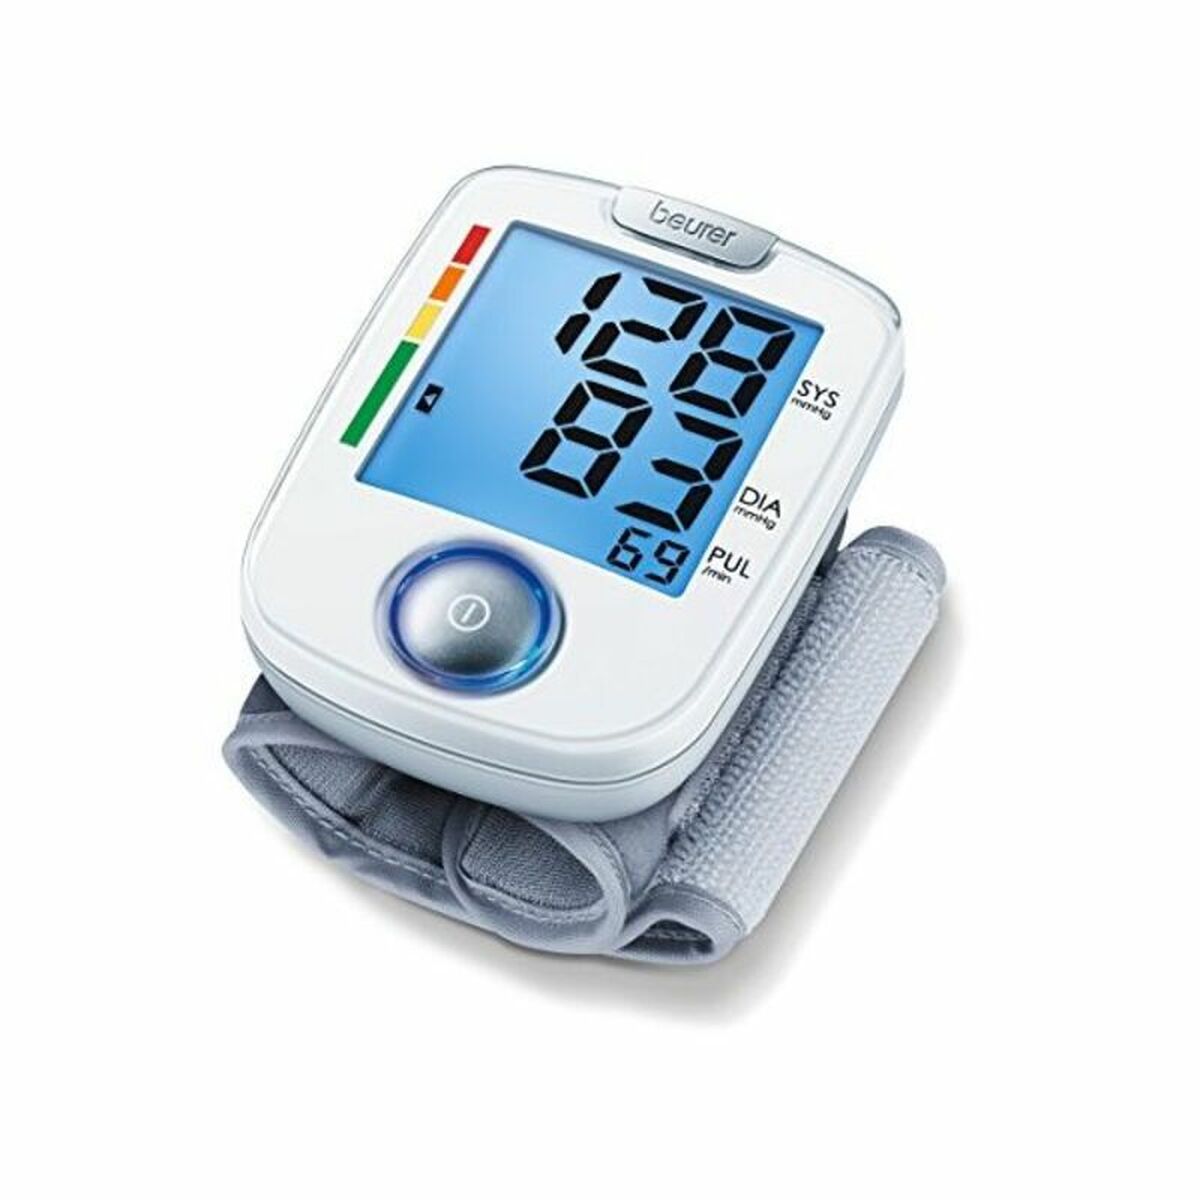 Blood Pressure Monitor Beurer BC44 (4 pcs), Beurer, Health and personal care, Medical equipment and supplies, blood-pressure-monitor-beurer-bc44-4-pcs, Brand_Beurer, category-reference-2609, category-reference-2617, category-reference-2619, category-reference-t-18107, category-reference-t-18264, category-reference-t-18305, category-reference-t-18309, category-reference-t-19669, Condition_NEW, ferretería, Price_50 - 100, RiotNook